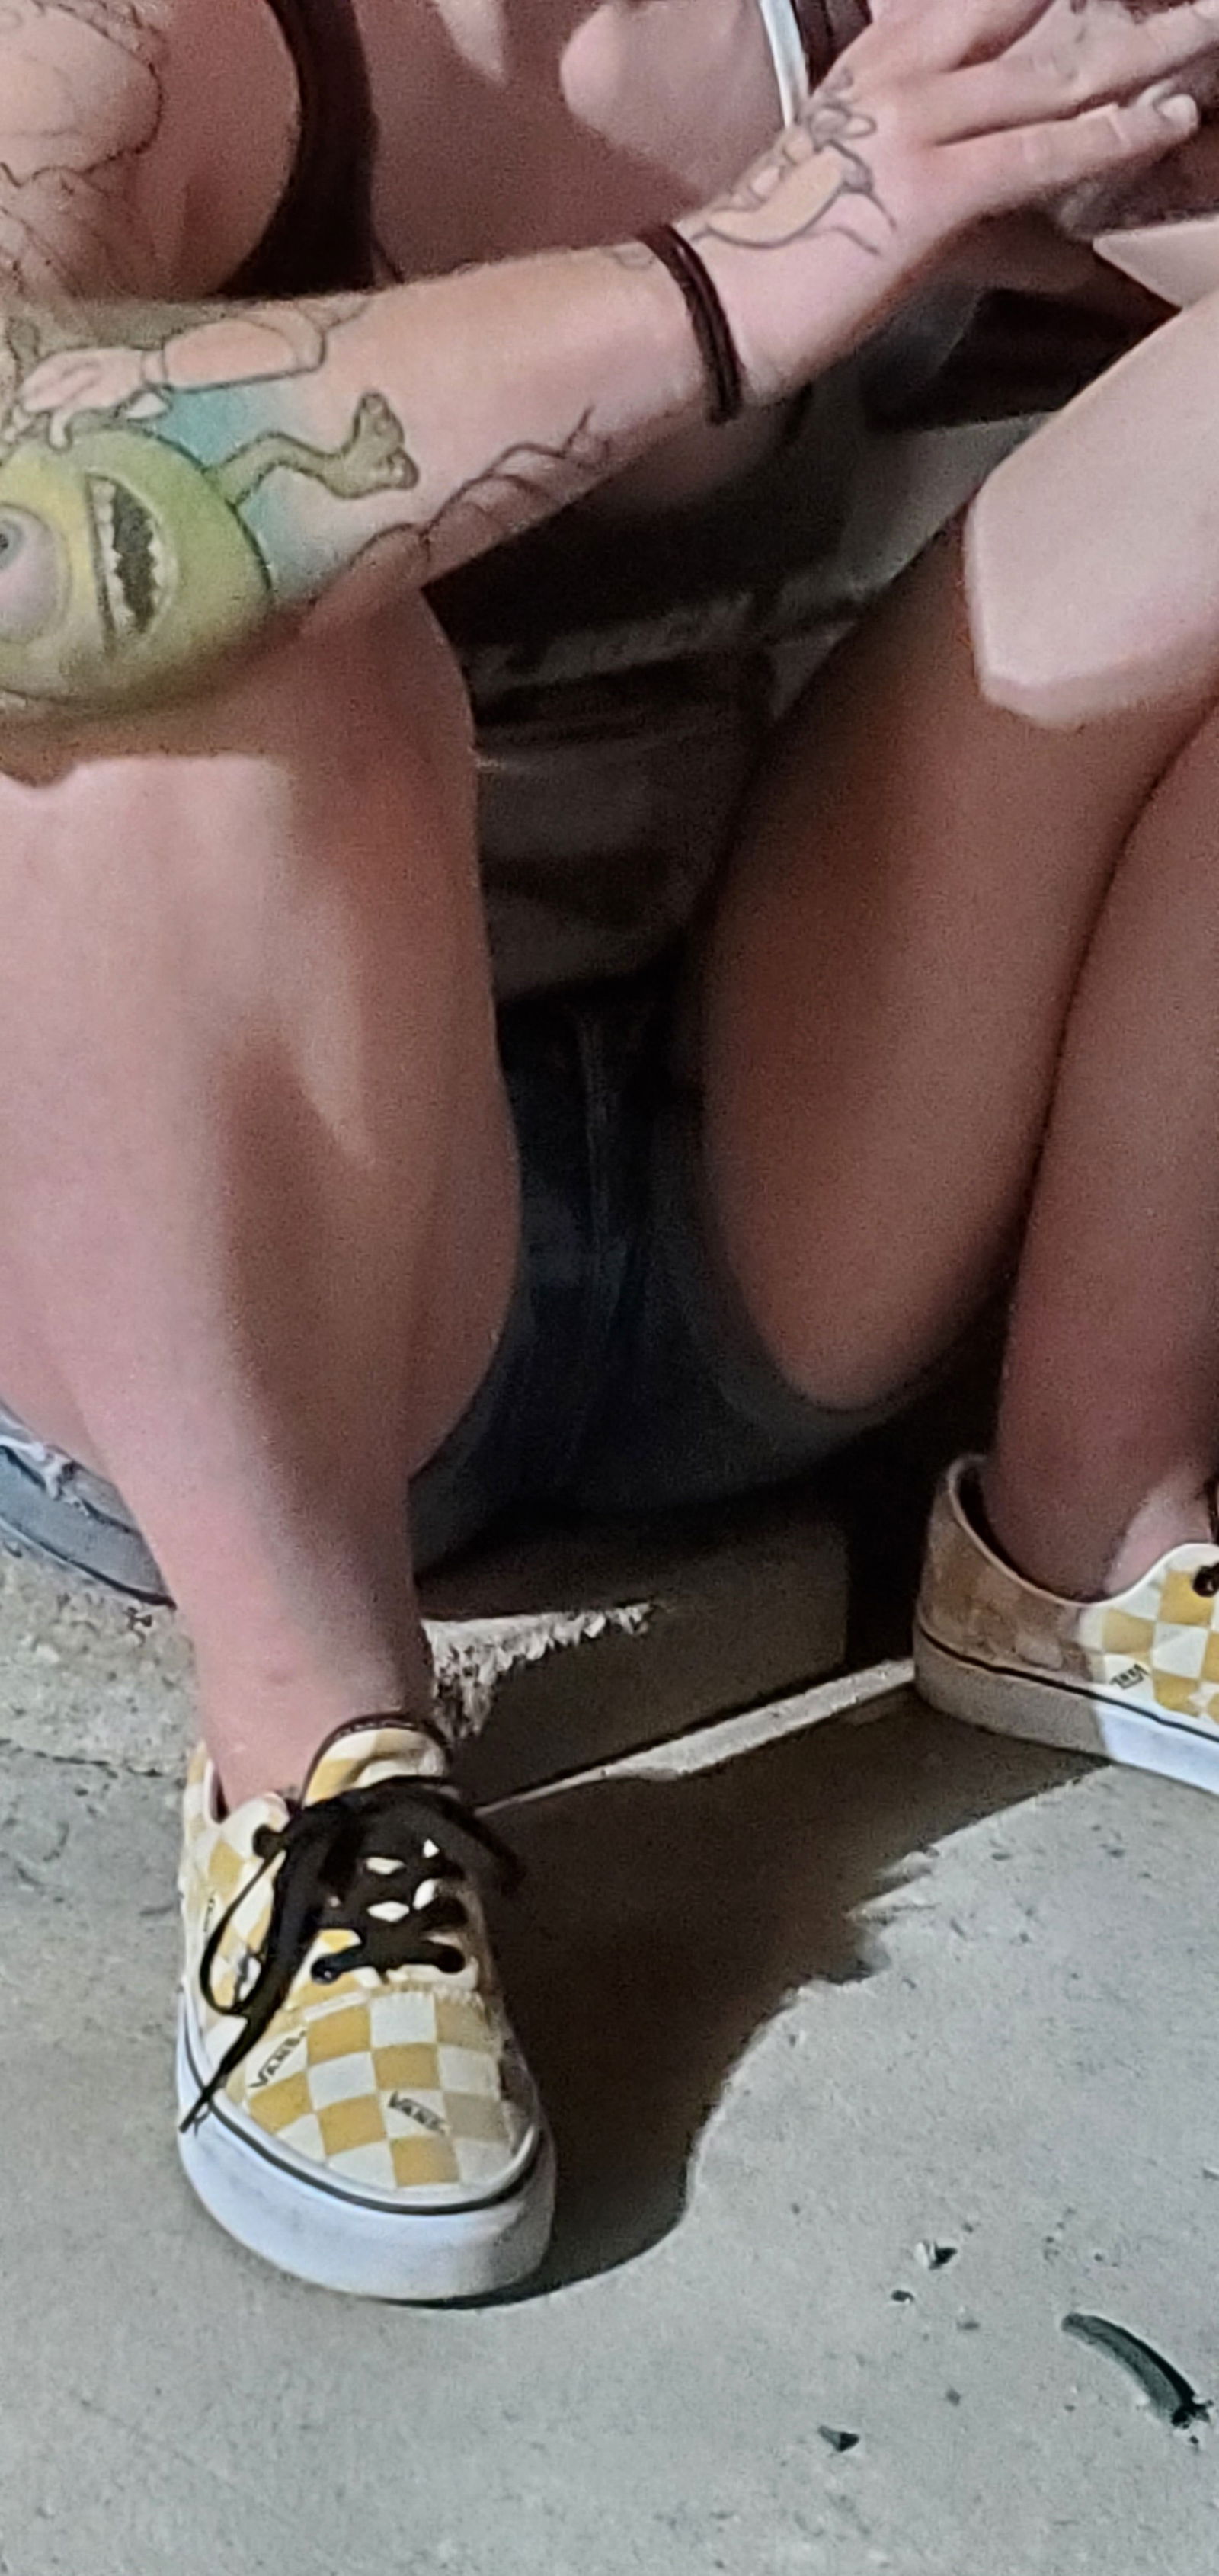 Photo by Snuffdemon666 with the username @Snuffdemon666,  August 24, 2020 at 4:41 AM. The post is about the topic Creepshots